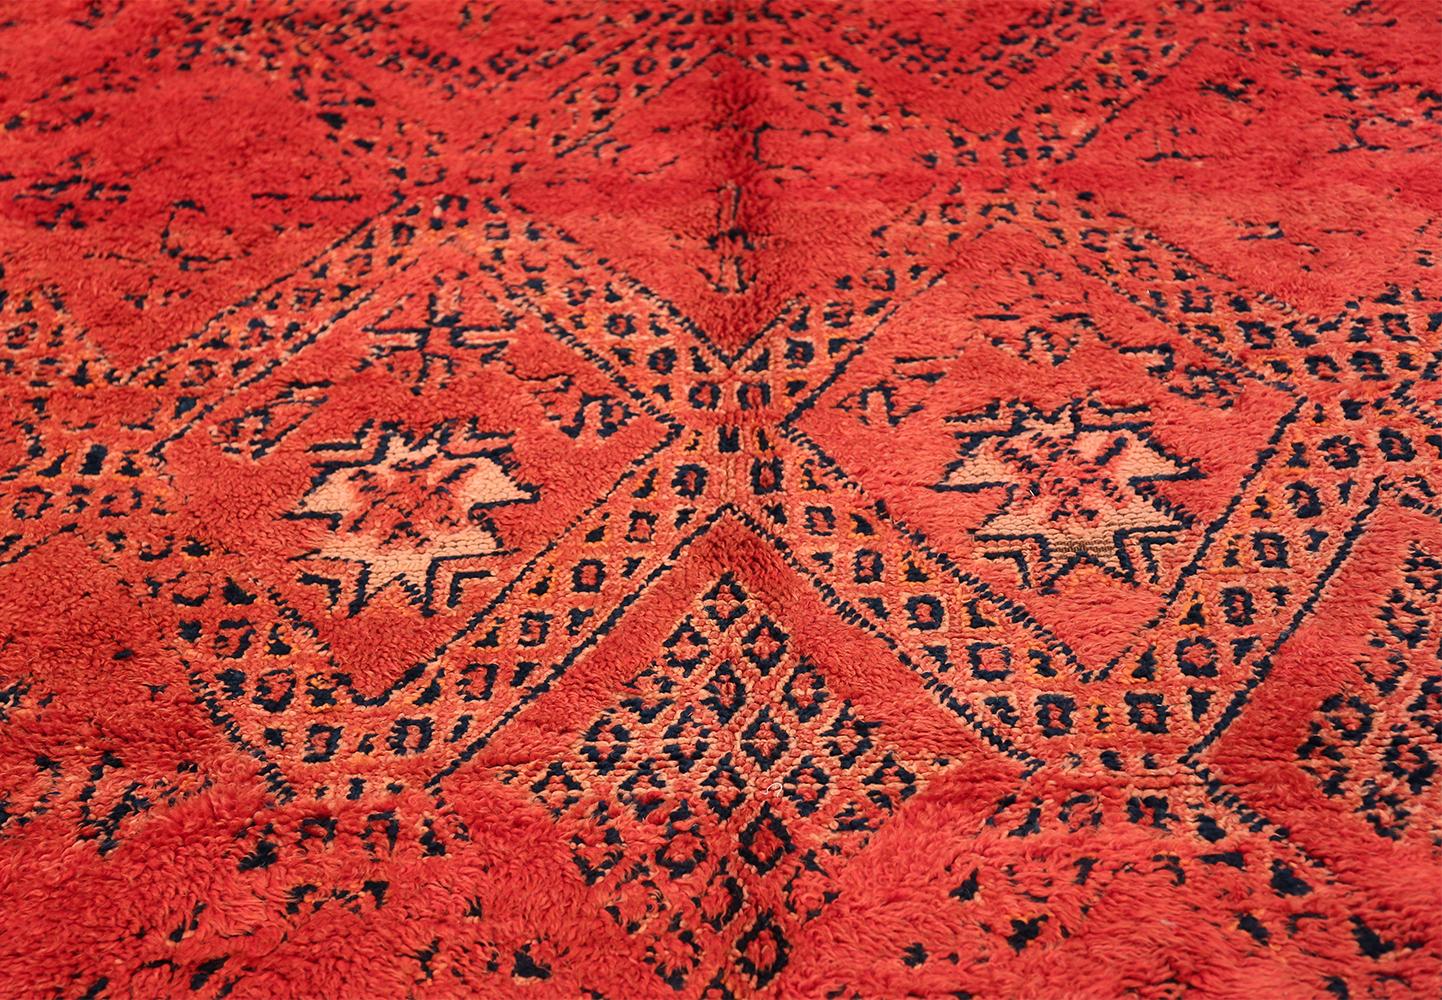 Vintage Gallery Size Double Sided Red Berber Moroccan Rug. Size: 6' x 12' 4